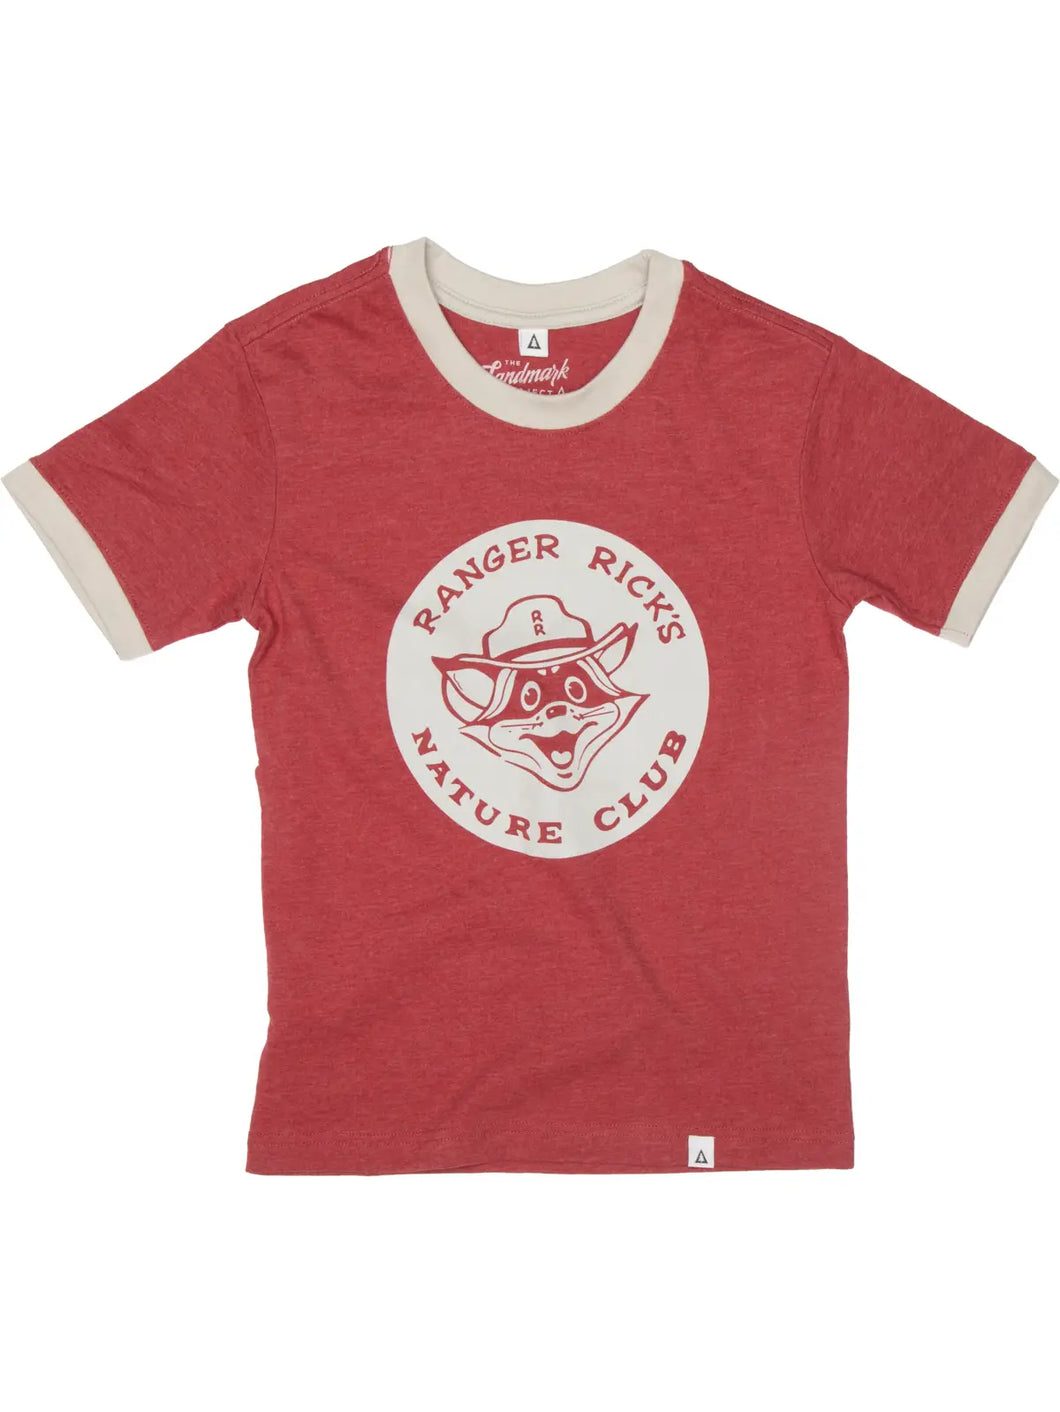 Ranger Rick Youth Club Nature Tee | Youth